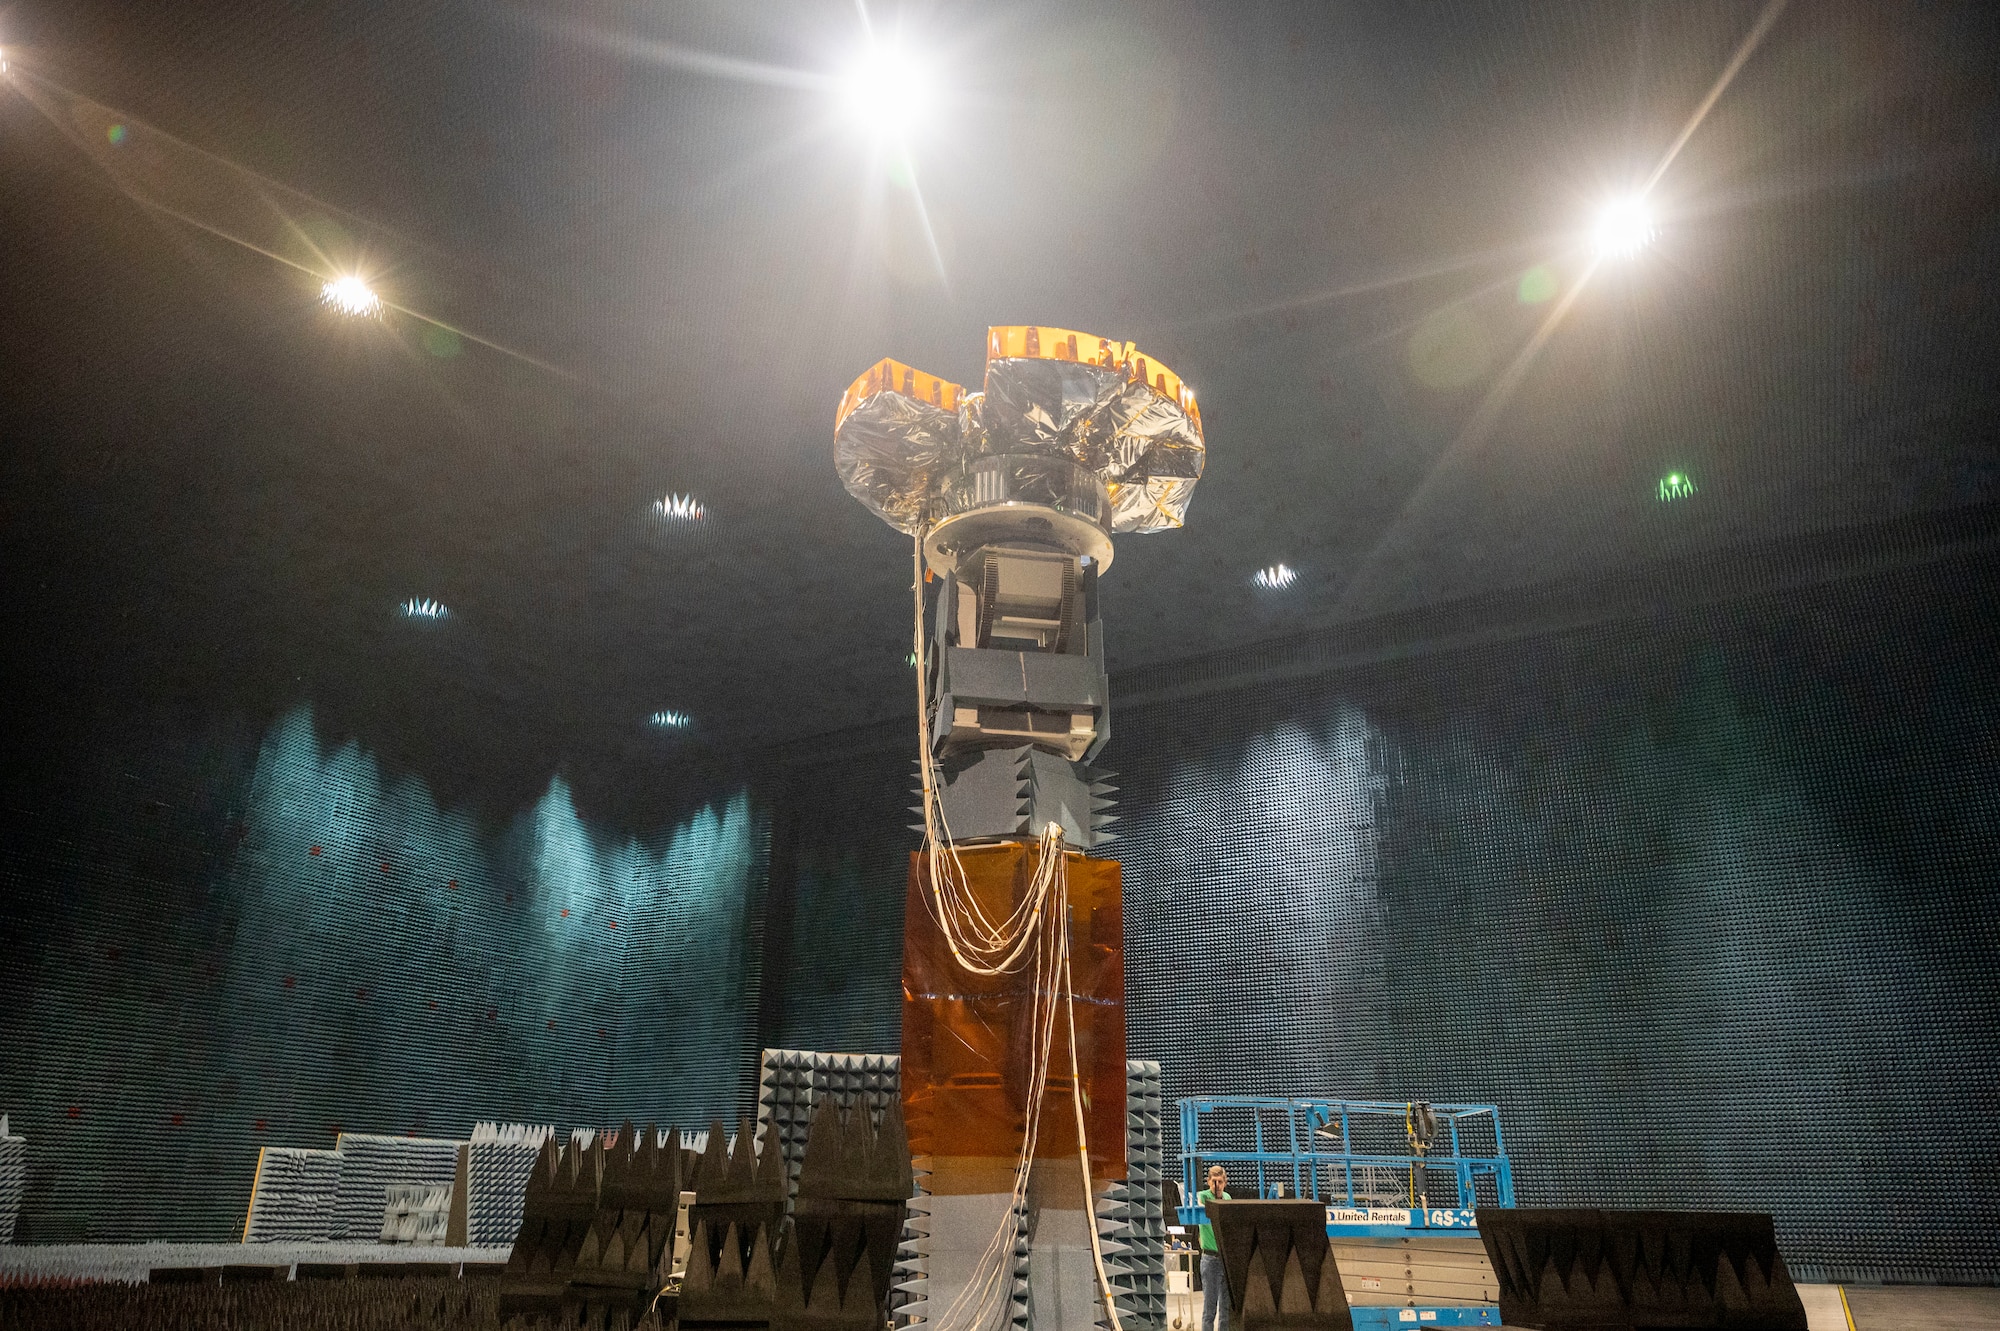 After the testing is complete, the NTS-3 will operate for one year in a near-geosynchronous orbit and will broadcast navigation signals from its phased array antenna.